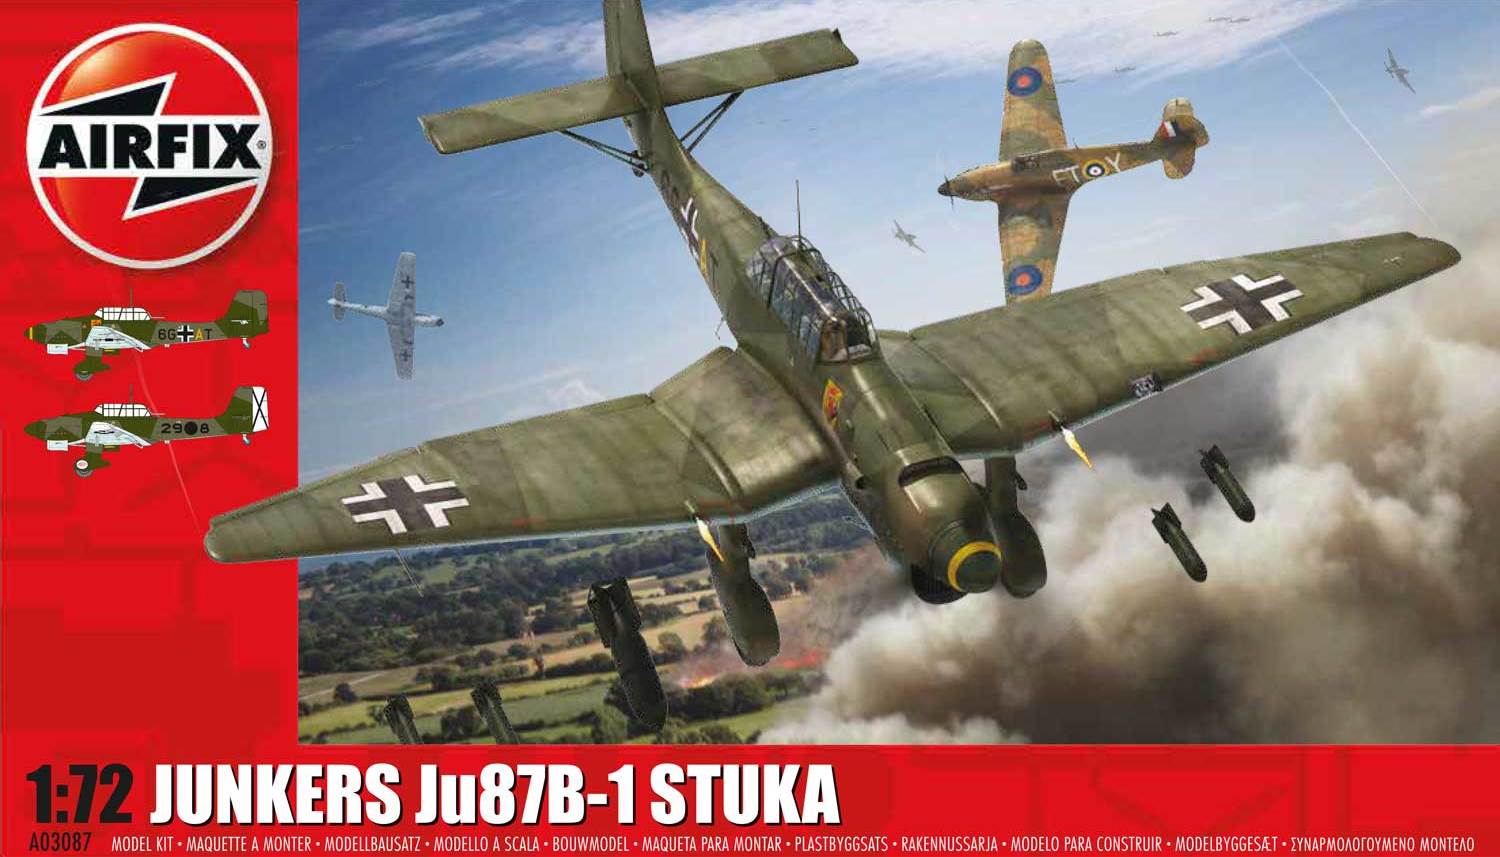 Airfix : Junkers Ju 87 B-1 : 1/72 Scale Model : In Box Review